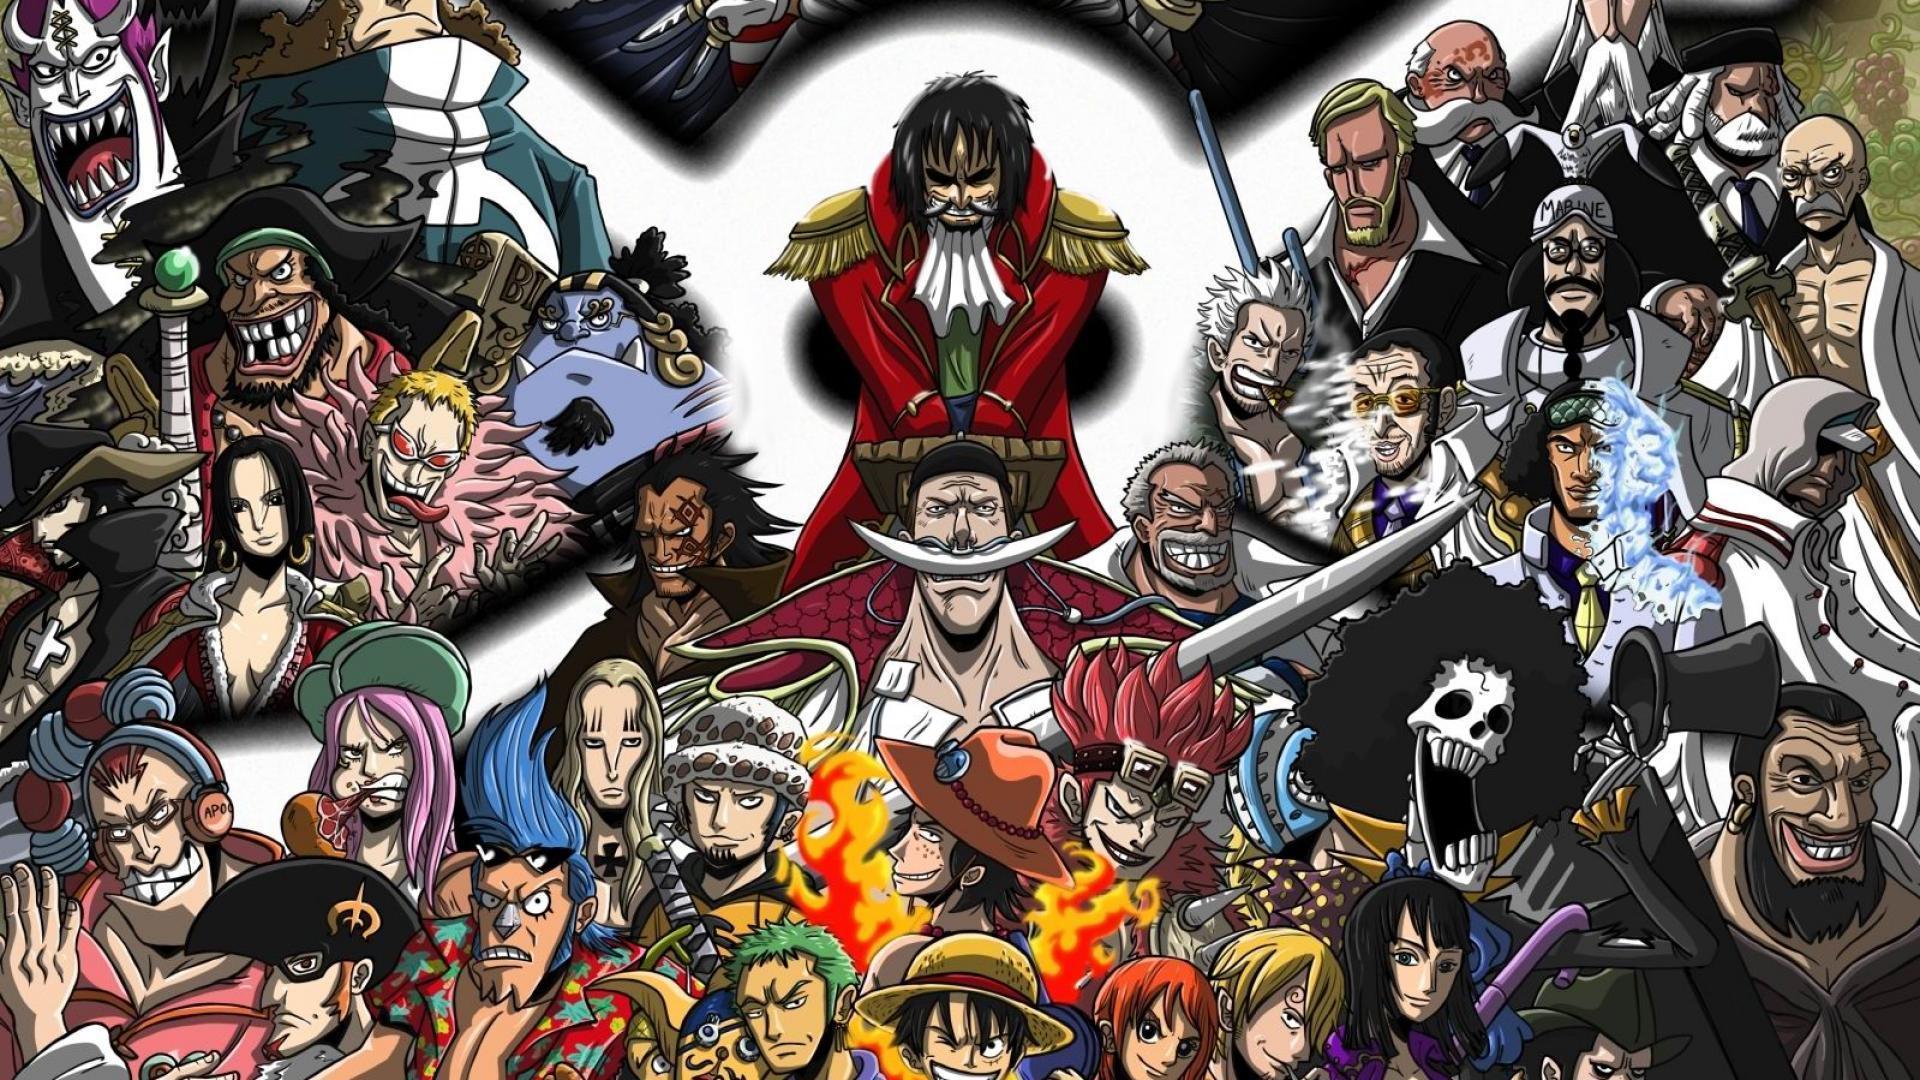 One Piece 1366x768 Wallpapers - Wallpaper Cave